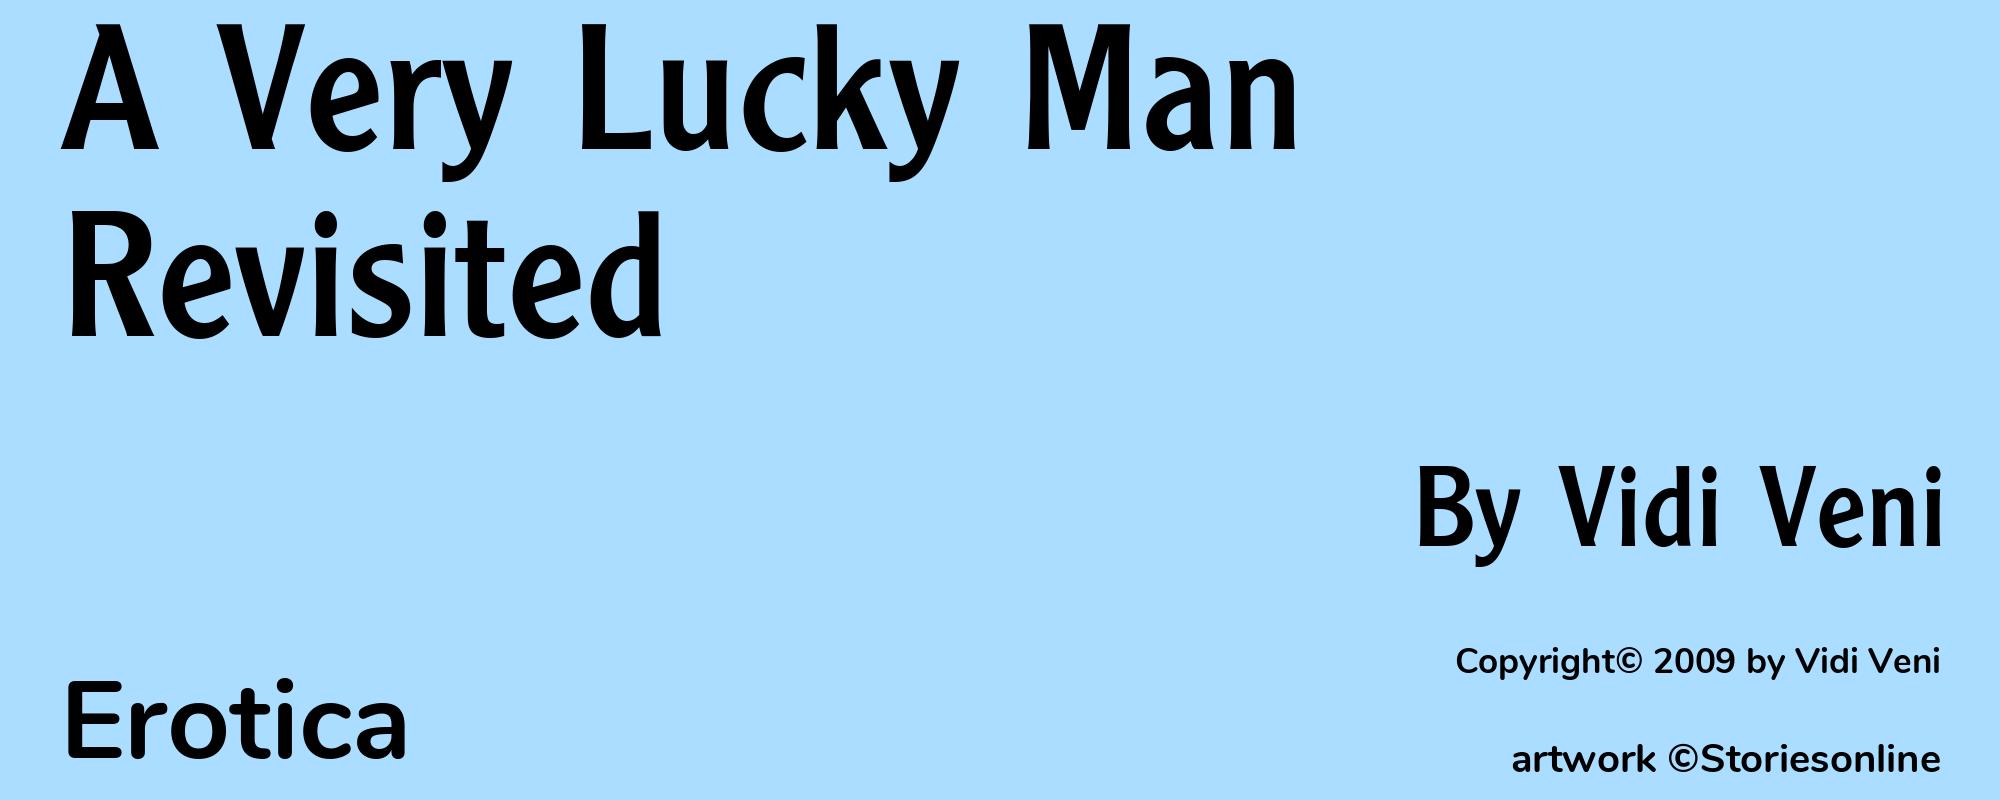 A Very Lucky Man Revisited - Cover